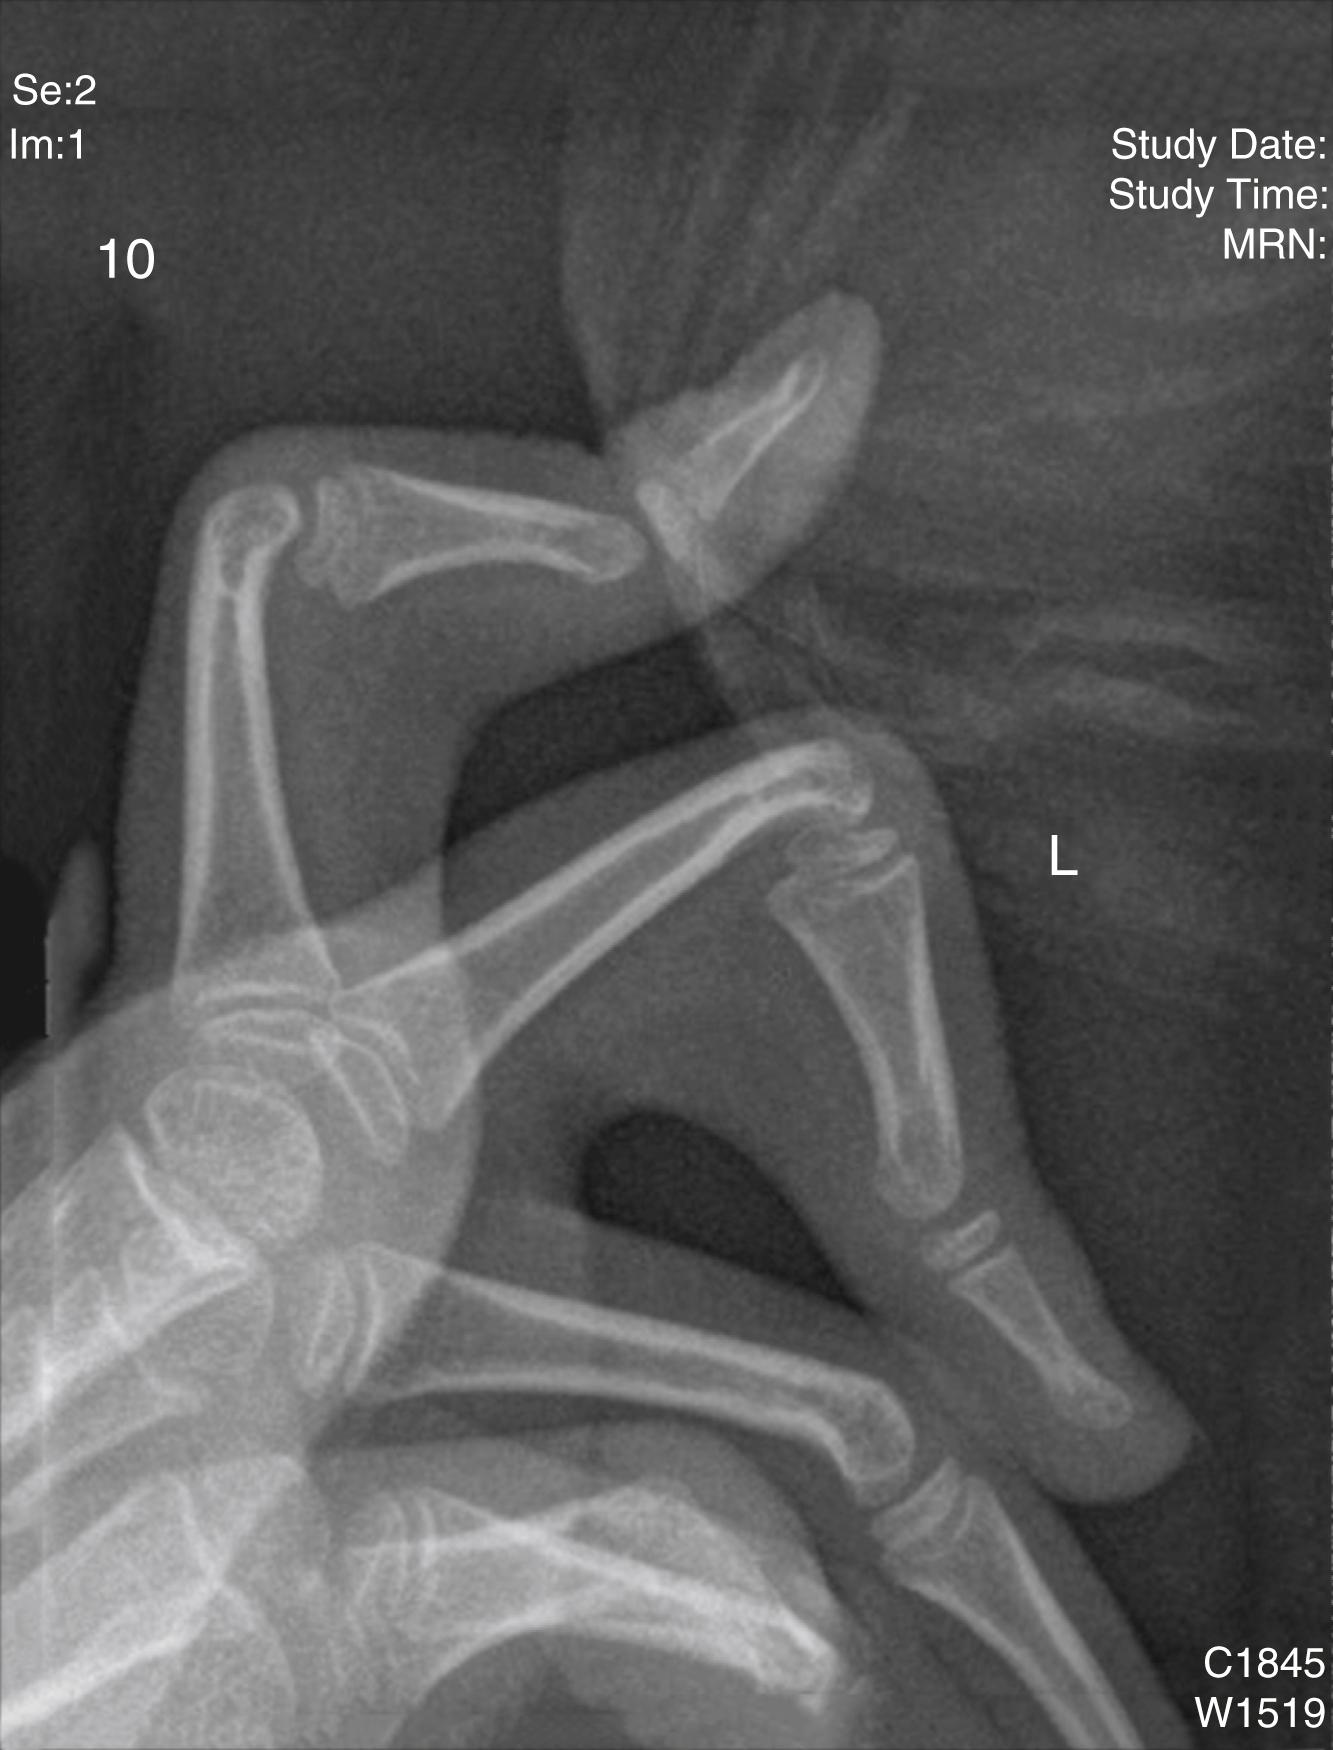 Fig. 45.9, Radiographic image of camptodactylous digits, demonstrating narrowing of the joint space in the proximal interphalangeal joint, flattening with volar curvature of the head of the proximal phalanx, and flattening of the base of the middle phalanx.